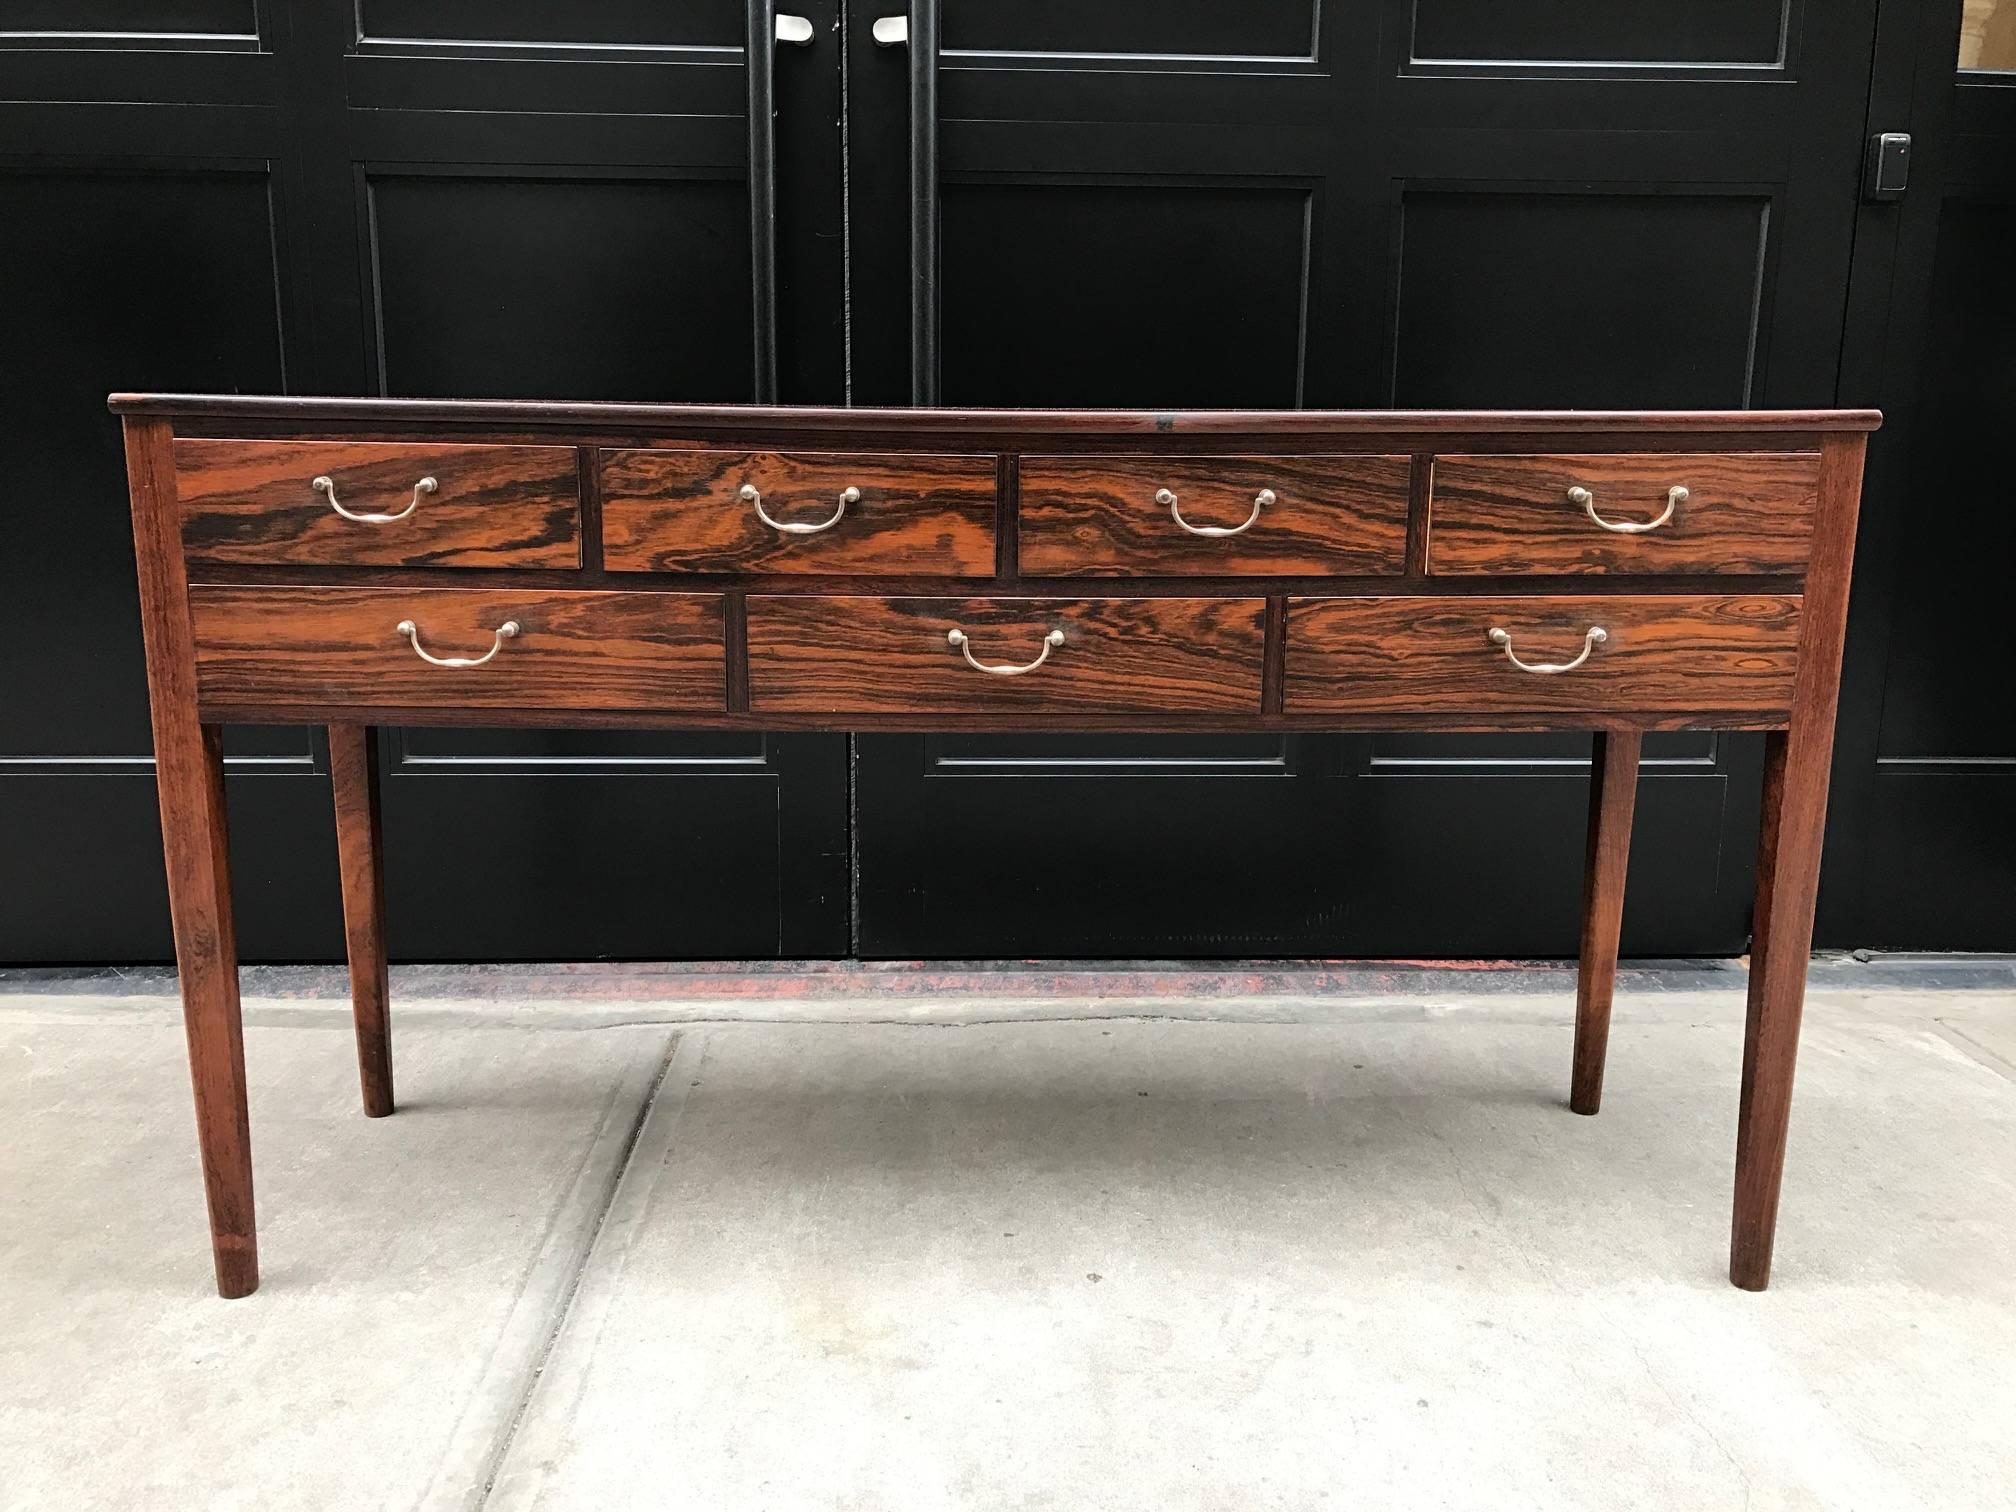 Early Ole Wanscher rosewood server table for A. J. Iversen.  Has a finished rosewood back, seven pull out drawers and original brass handles.  Retains Illums Bolighus label.  